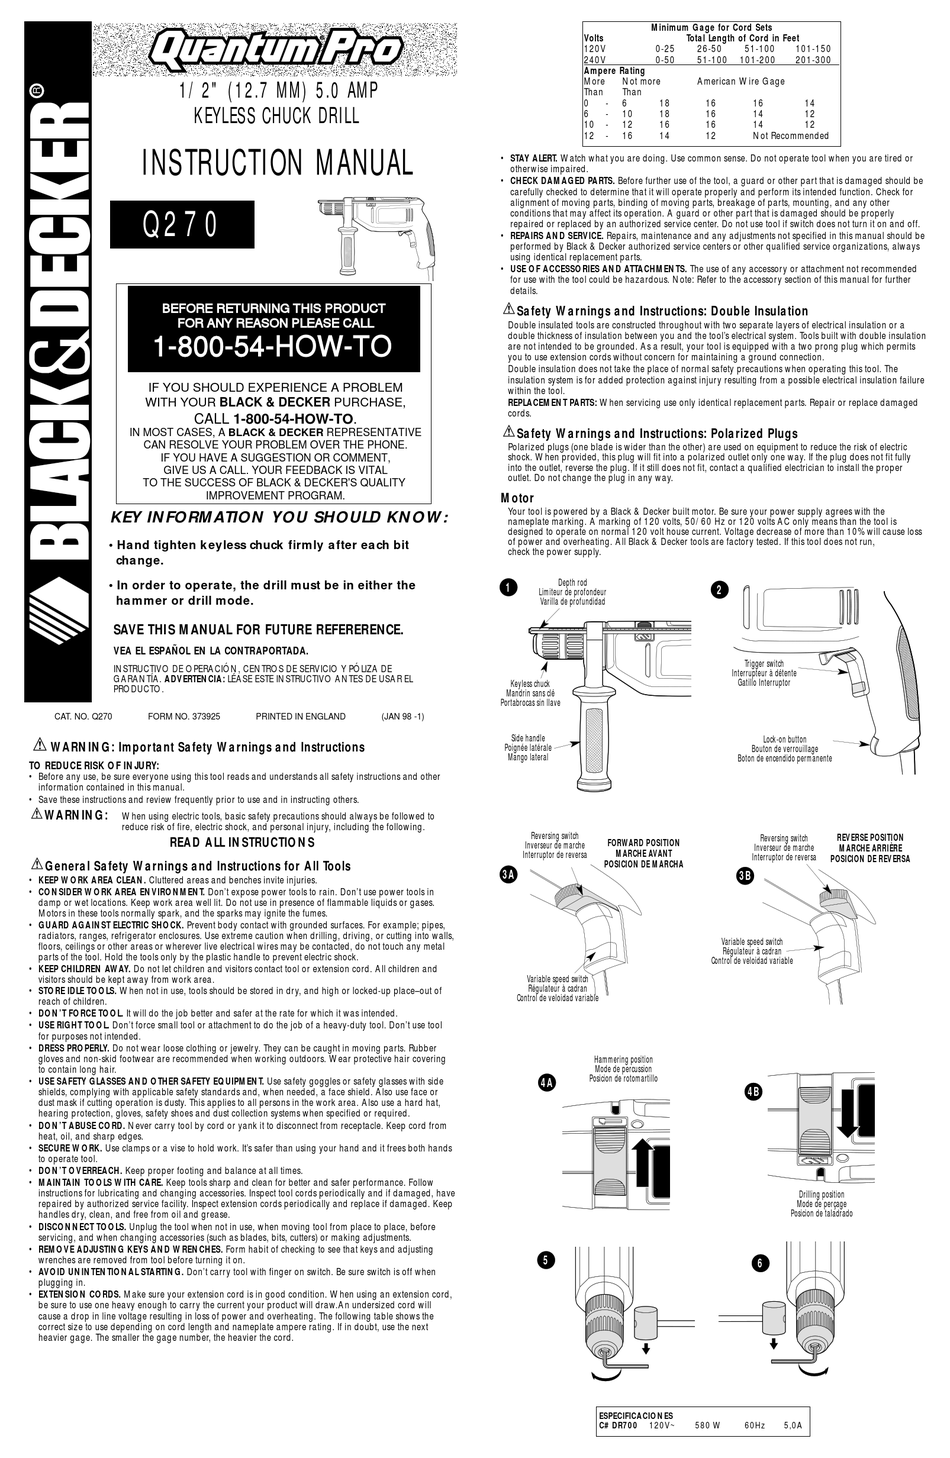 User manual Black & Decker KD975 (English - 76 pages)